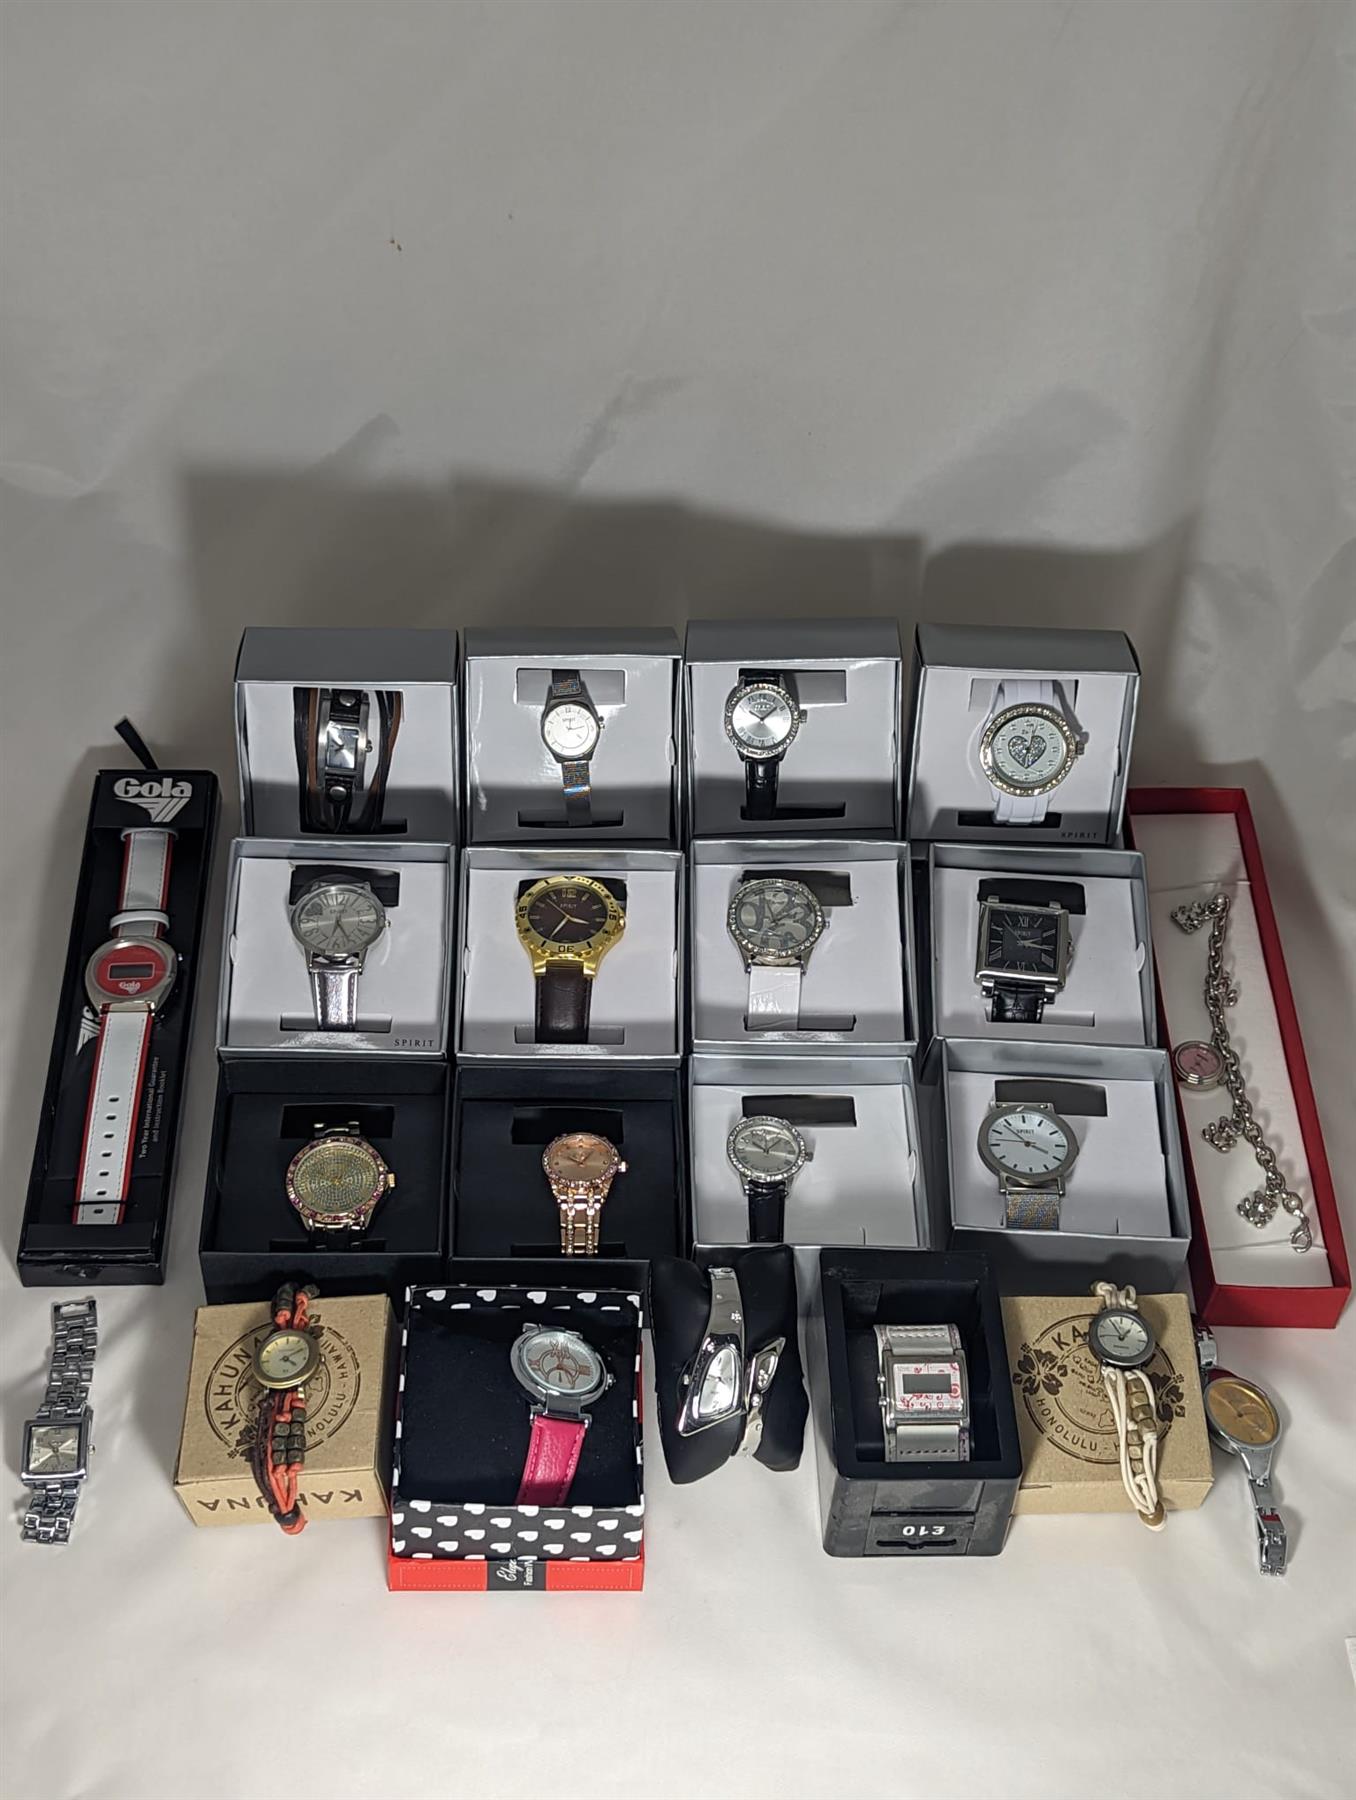 50 Watches Keychain Clock for £85 Ladies & Children  Mix  - CLEARANCE NEEDS RE-BATTERY